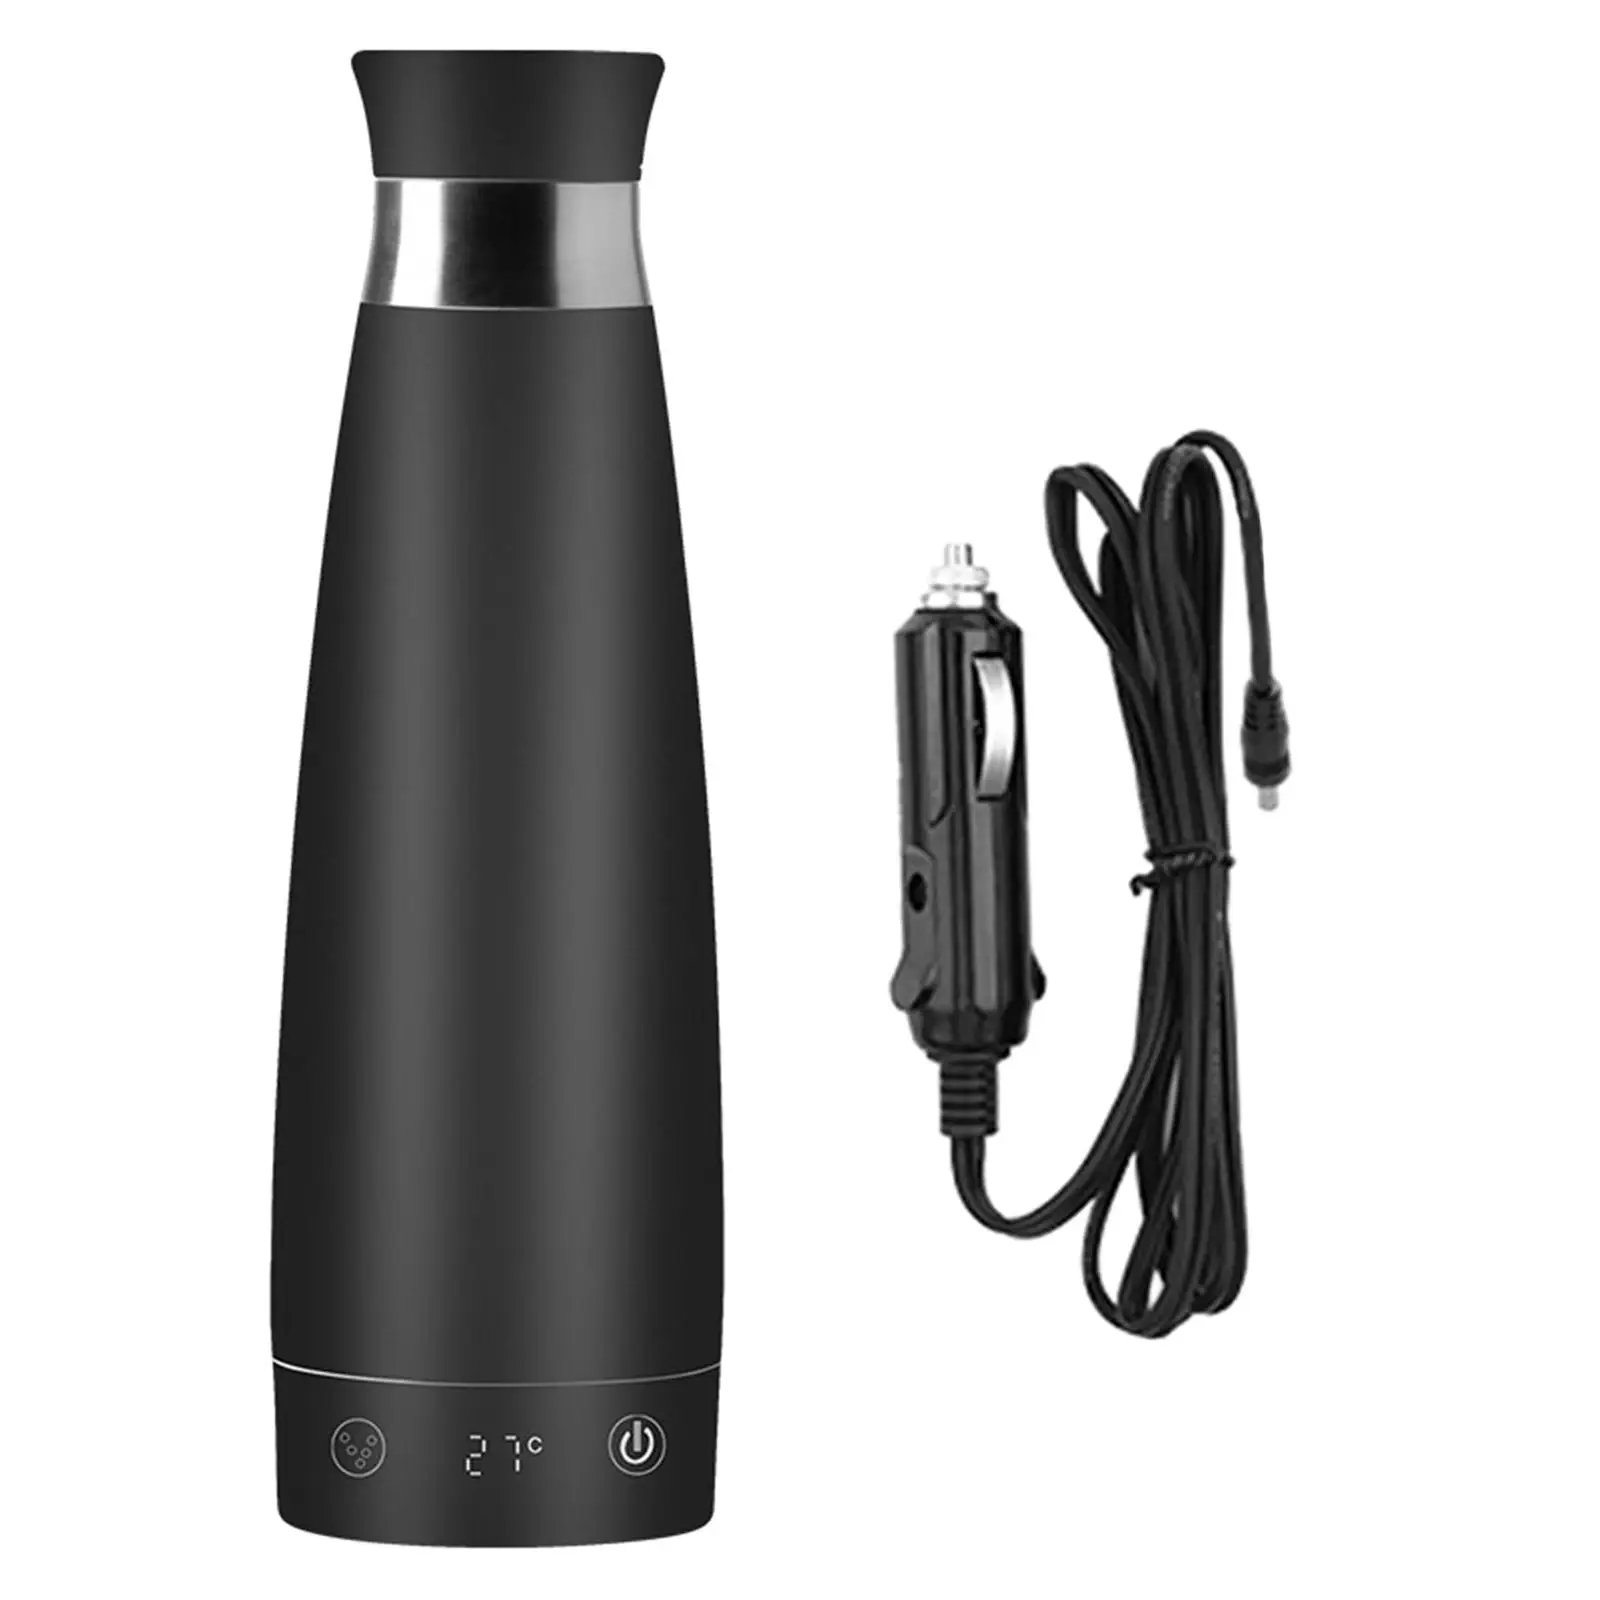 300ml Electric Heating Cup Universal Kettle Portable Water Bottle for Coffee